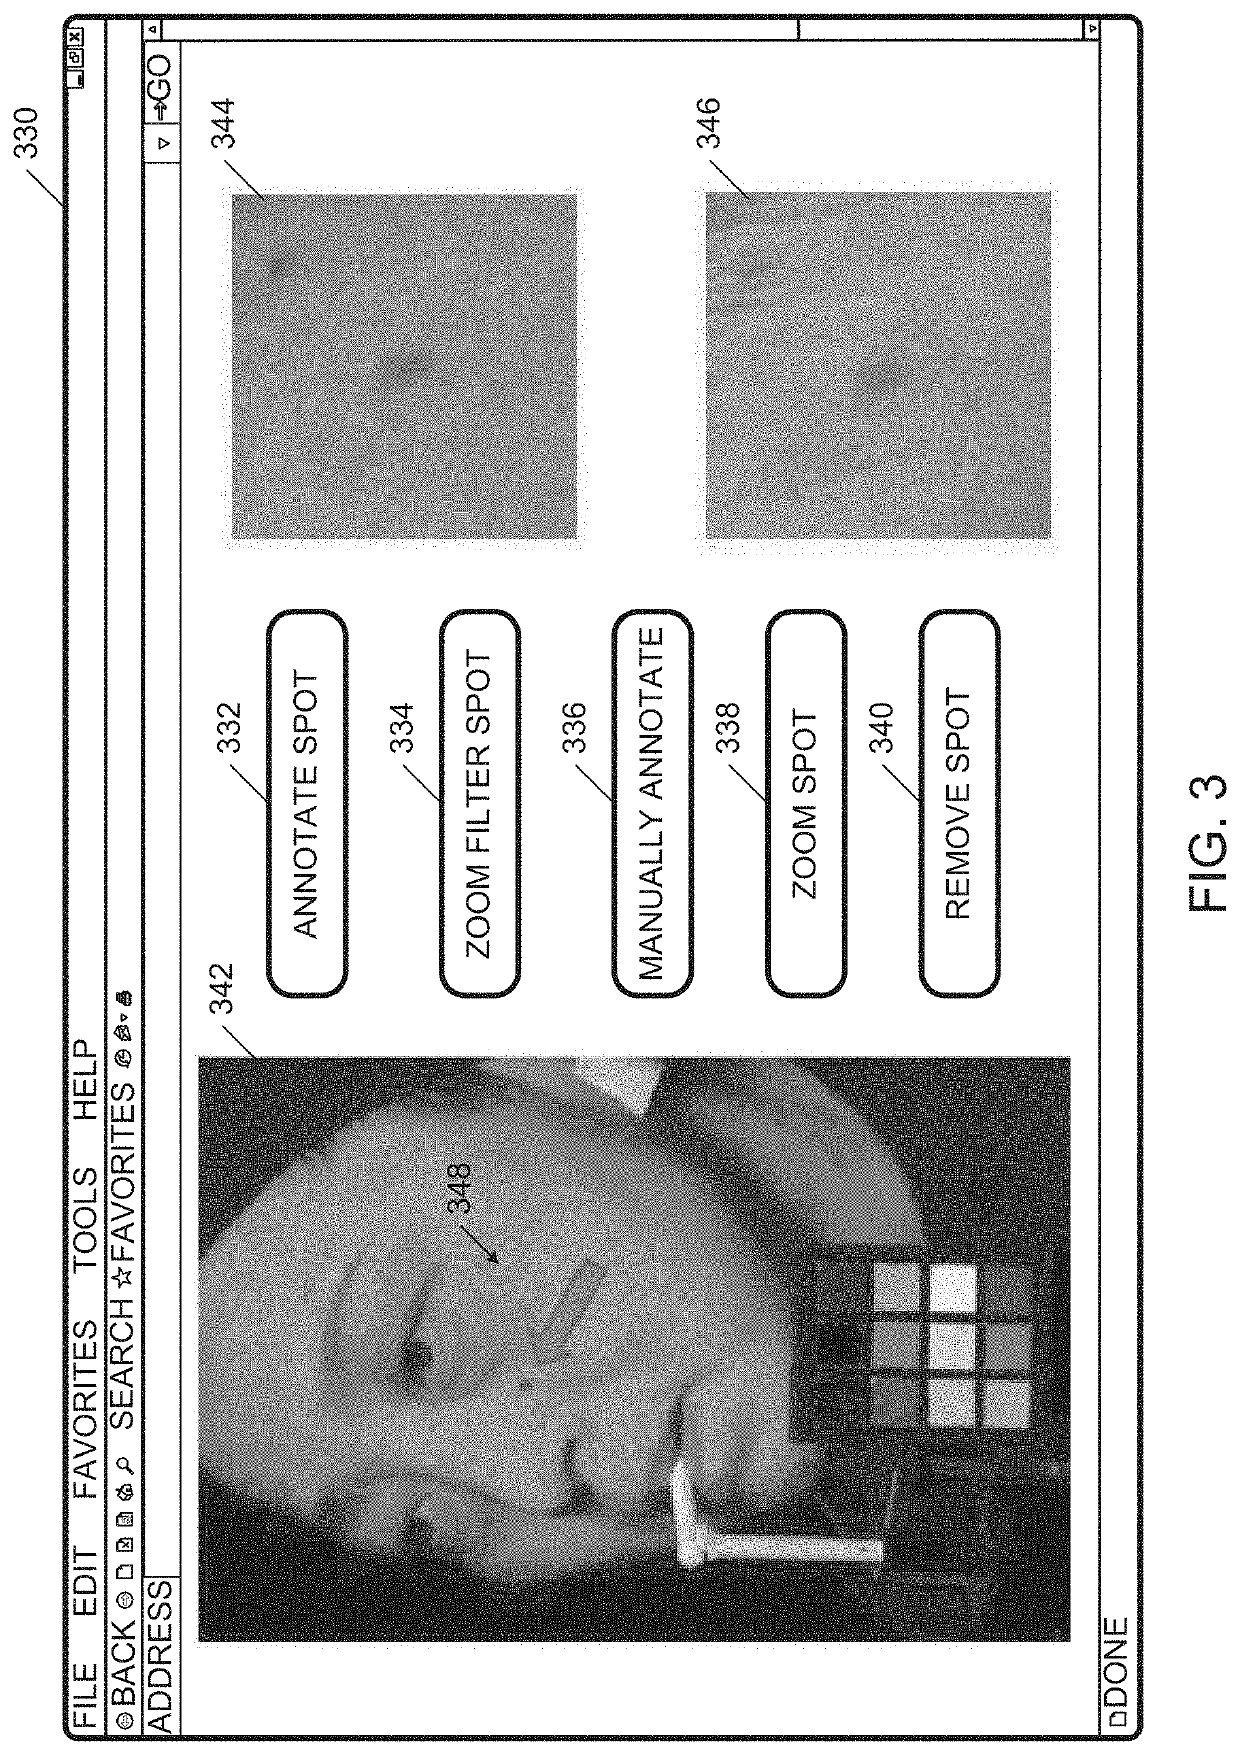 Systems and Methods for Identifying Hyperpigmented Spots